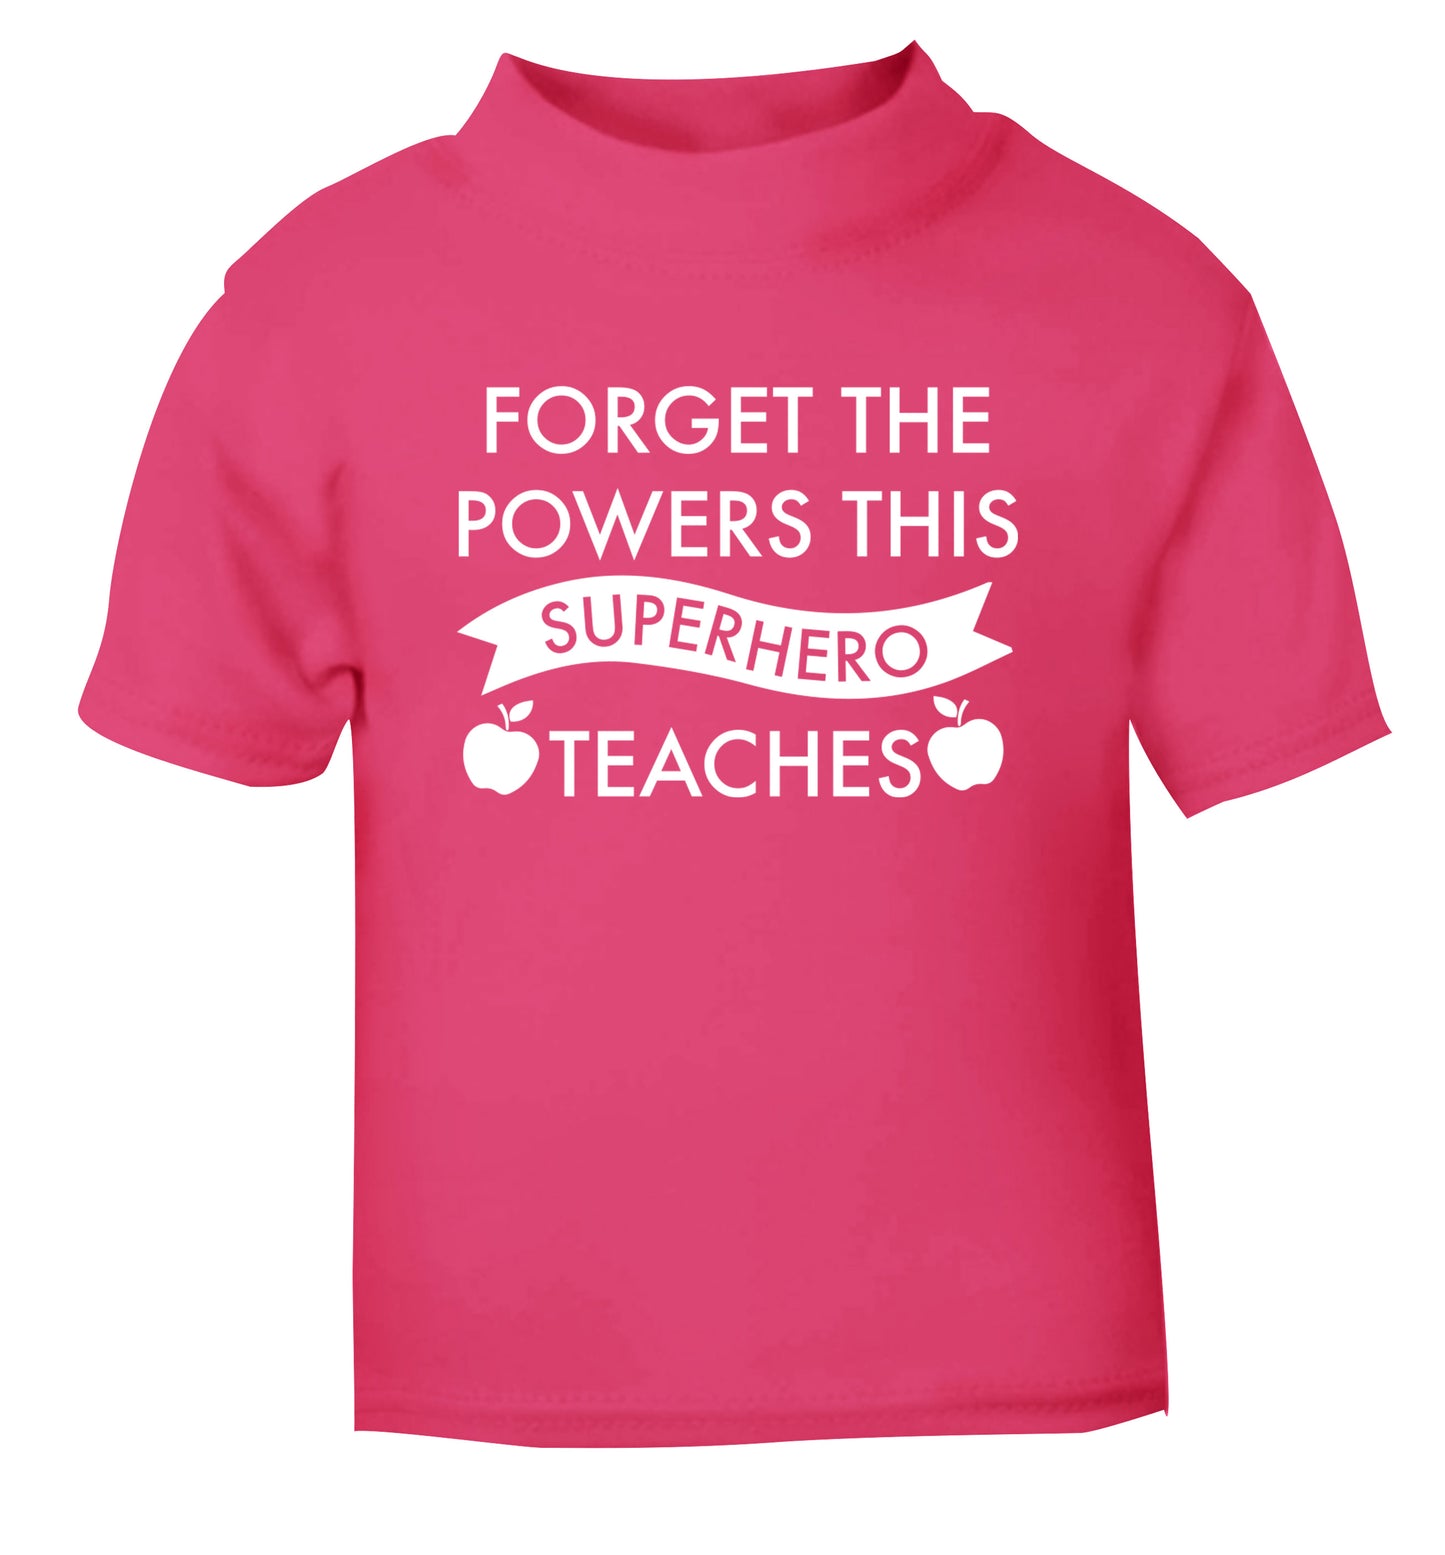 Forget the powers this superhero teaches pink Baby Toddler Tshirt 2 Years